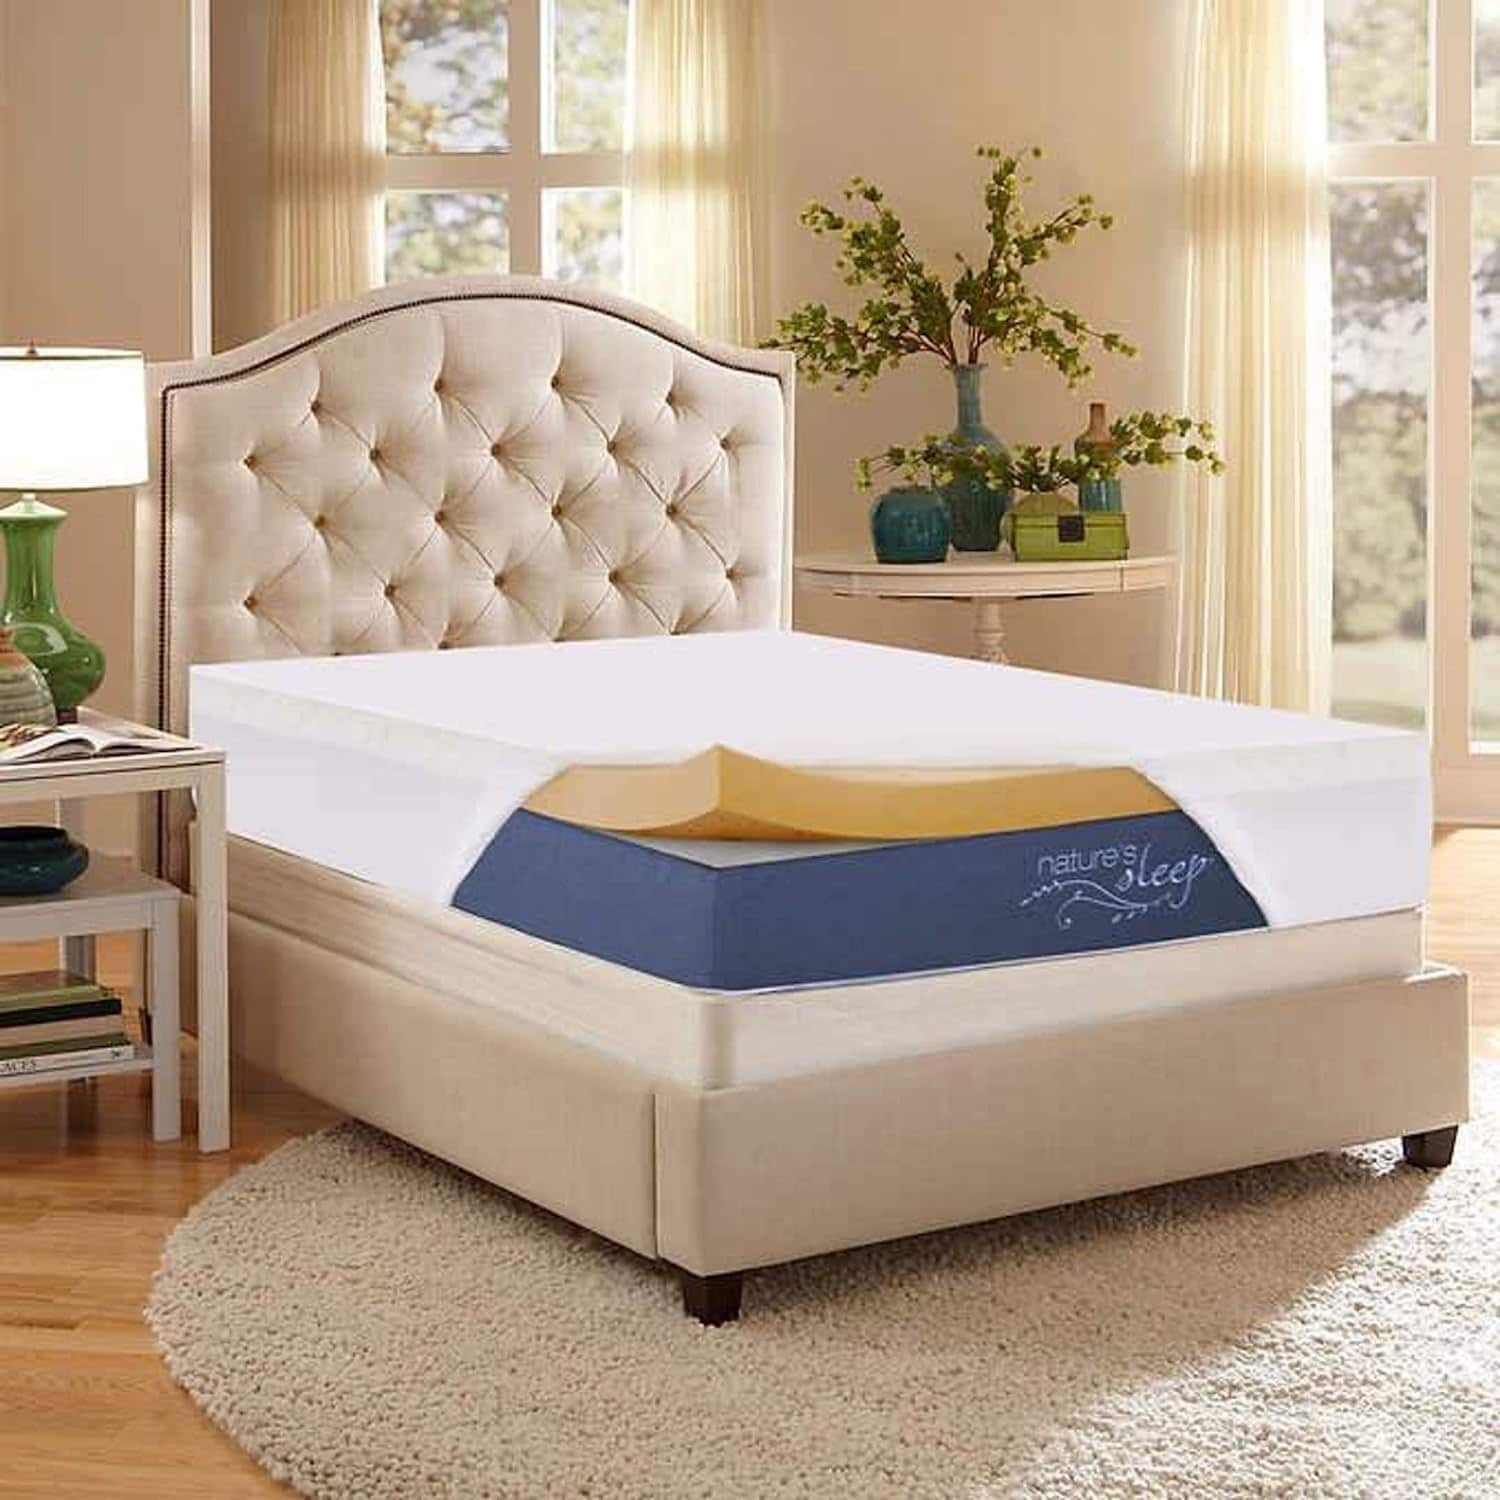 https://ak1.ostkcdn.com/images/products/is/images/direct/32182943d0670c067e1aa54b713e6bc49d9d9e3e/3-Inch-Copper-Infused-Gel-Memory-Foam-Mattress-Topper---with-Fitted-Cover.jpg